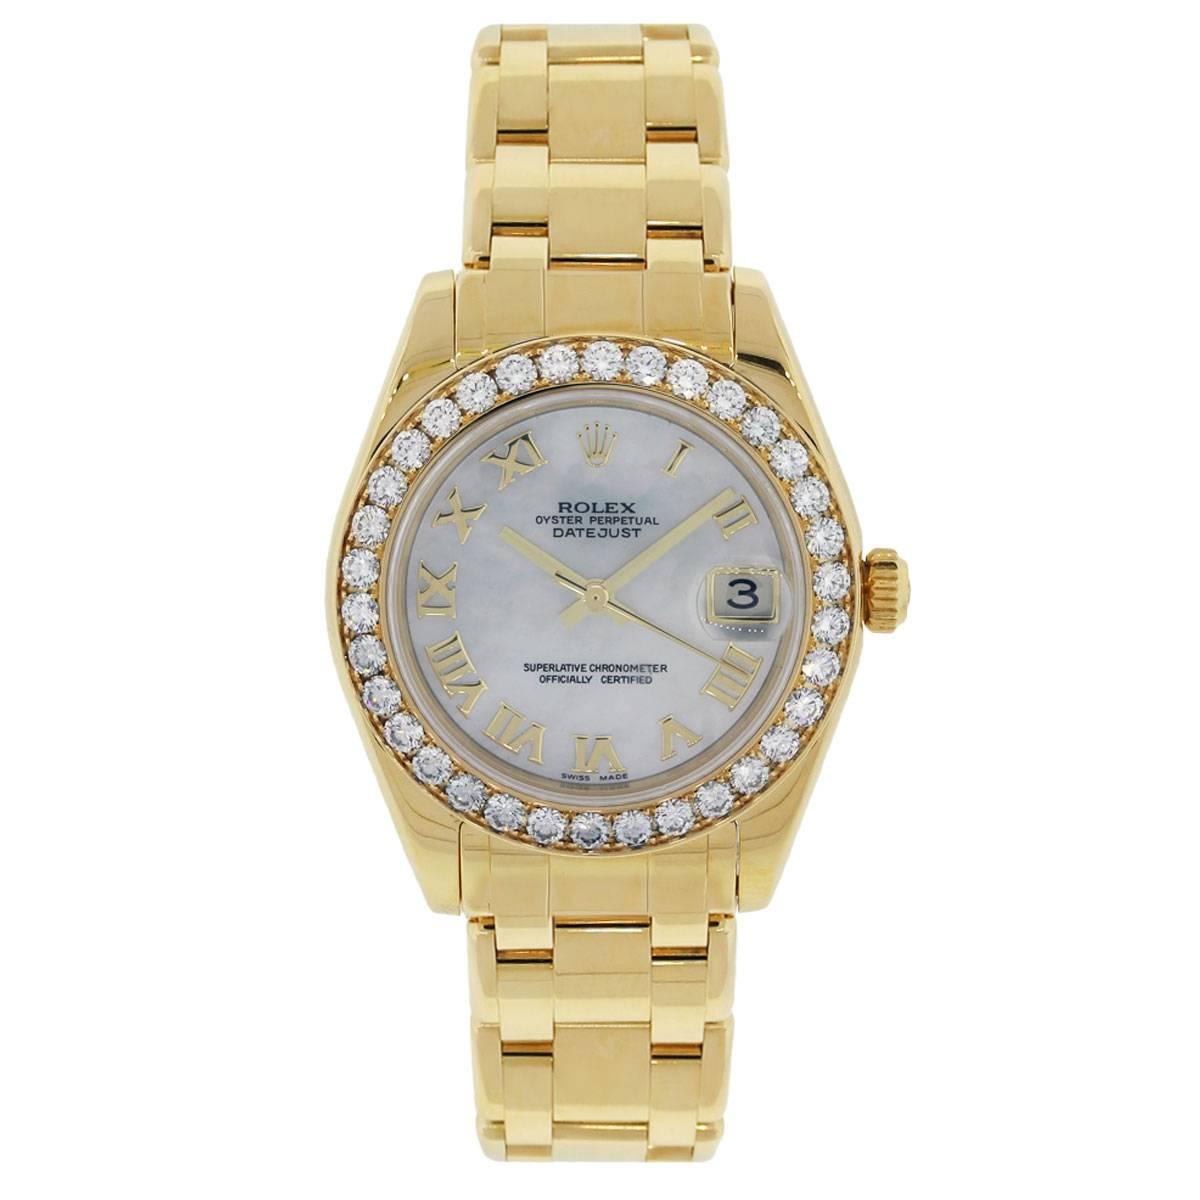 Brand: Rolex
MPN: 81298
Model: Datejust Masterpiece (midsize)
Case Material: 18k yellow gold
Case Diameter: 34mm
Crystal: Scratch resistant sapphire
Bezel: Round brilliant diamond bezel (factory)
Dial: Mother of pearl roman dial with gold hands and